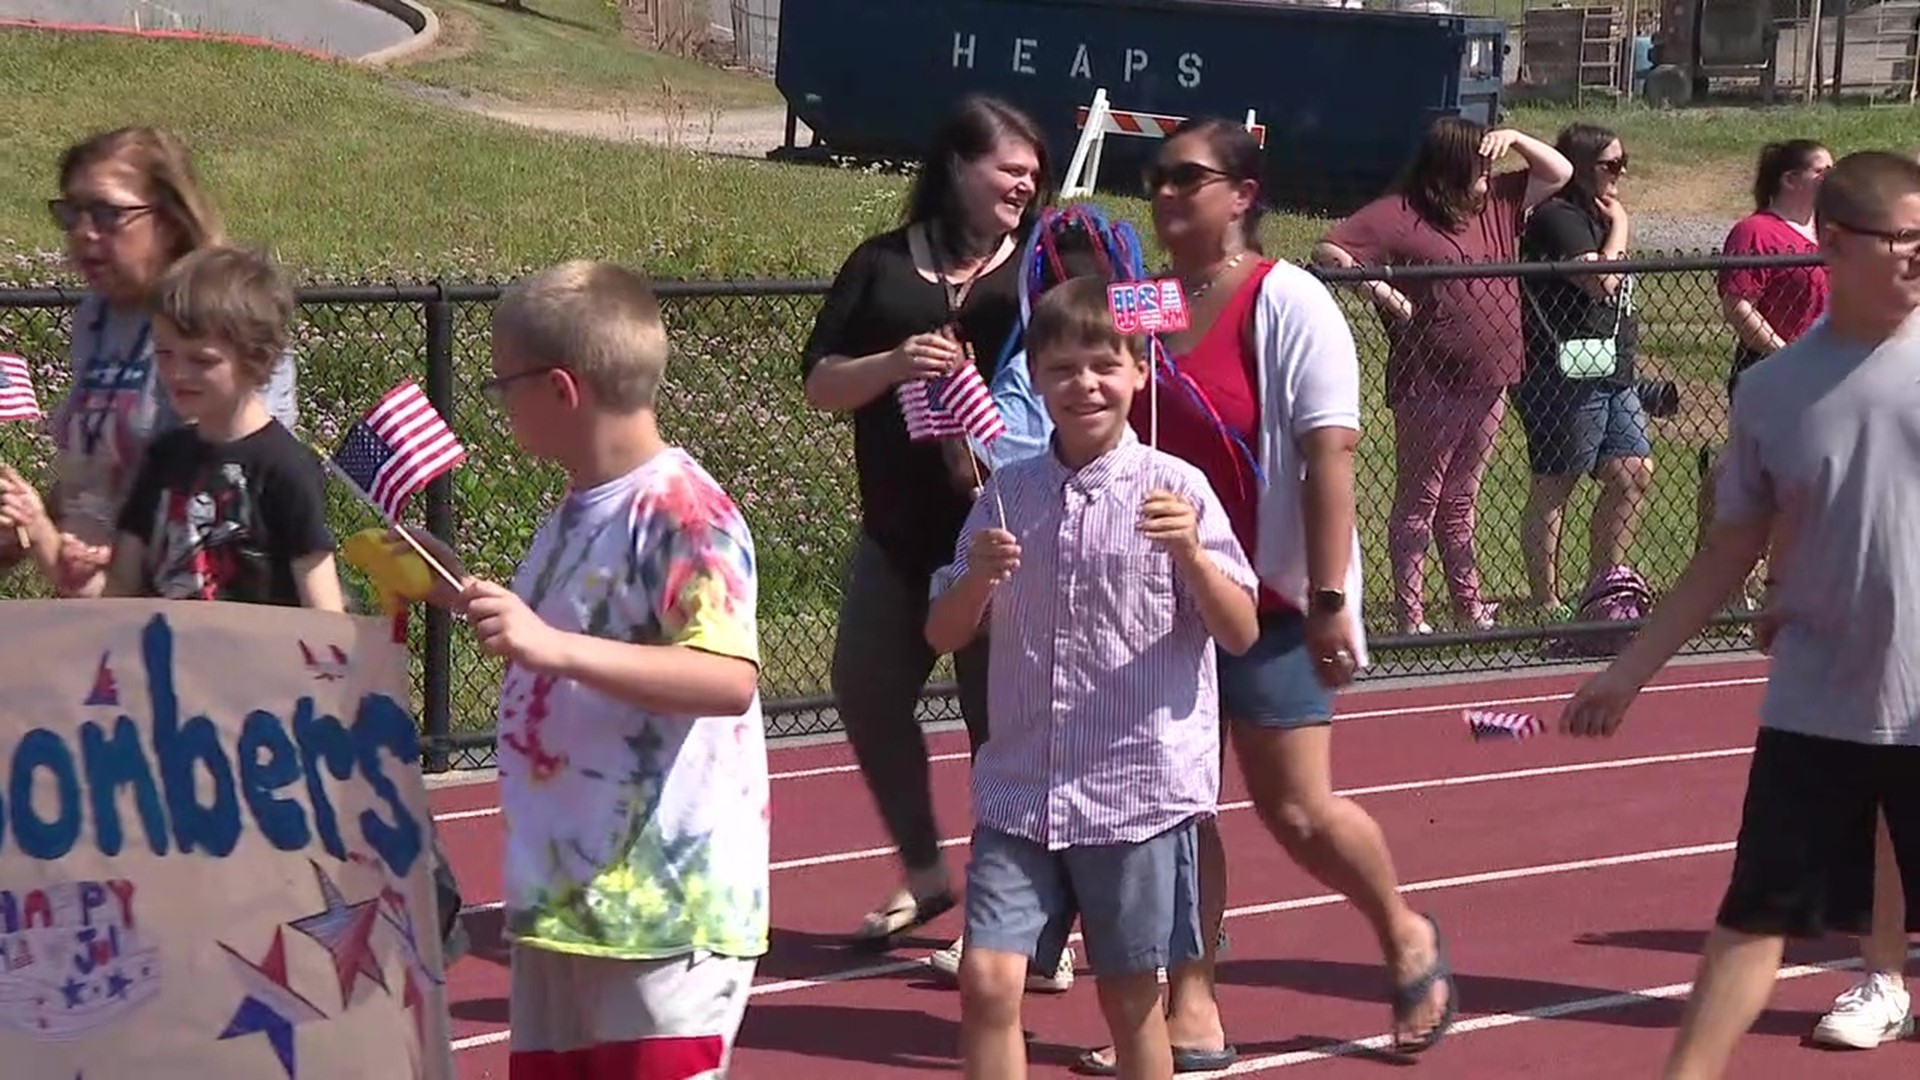 Nearly 200 students from an intermediate unit in central Pennsylvania held a Fourth of July parade near Montoursville.